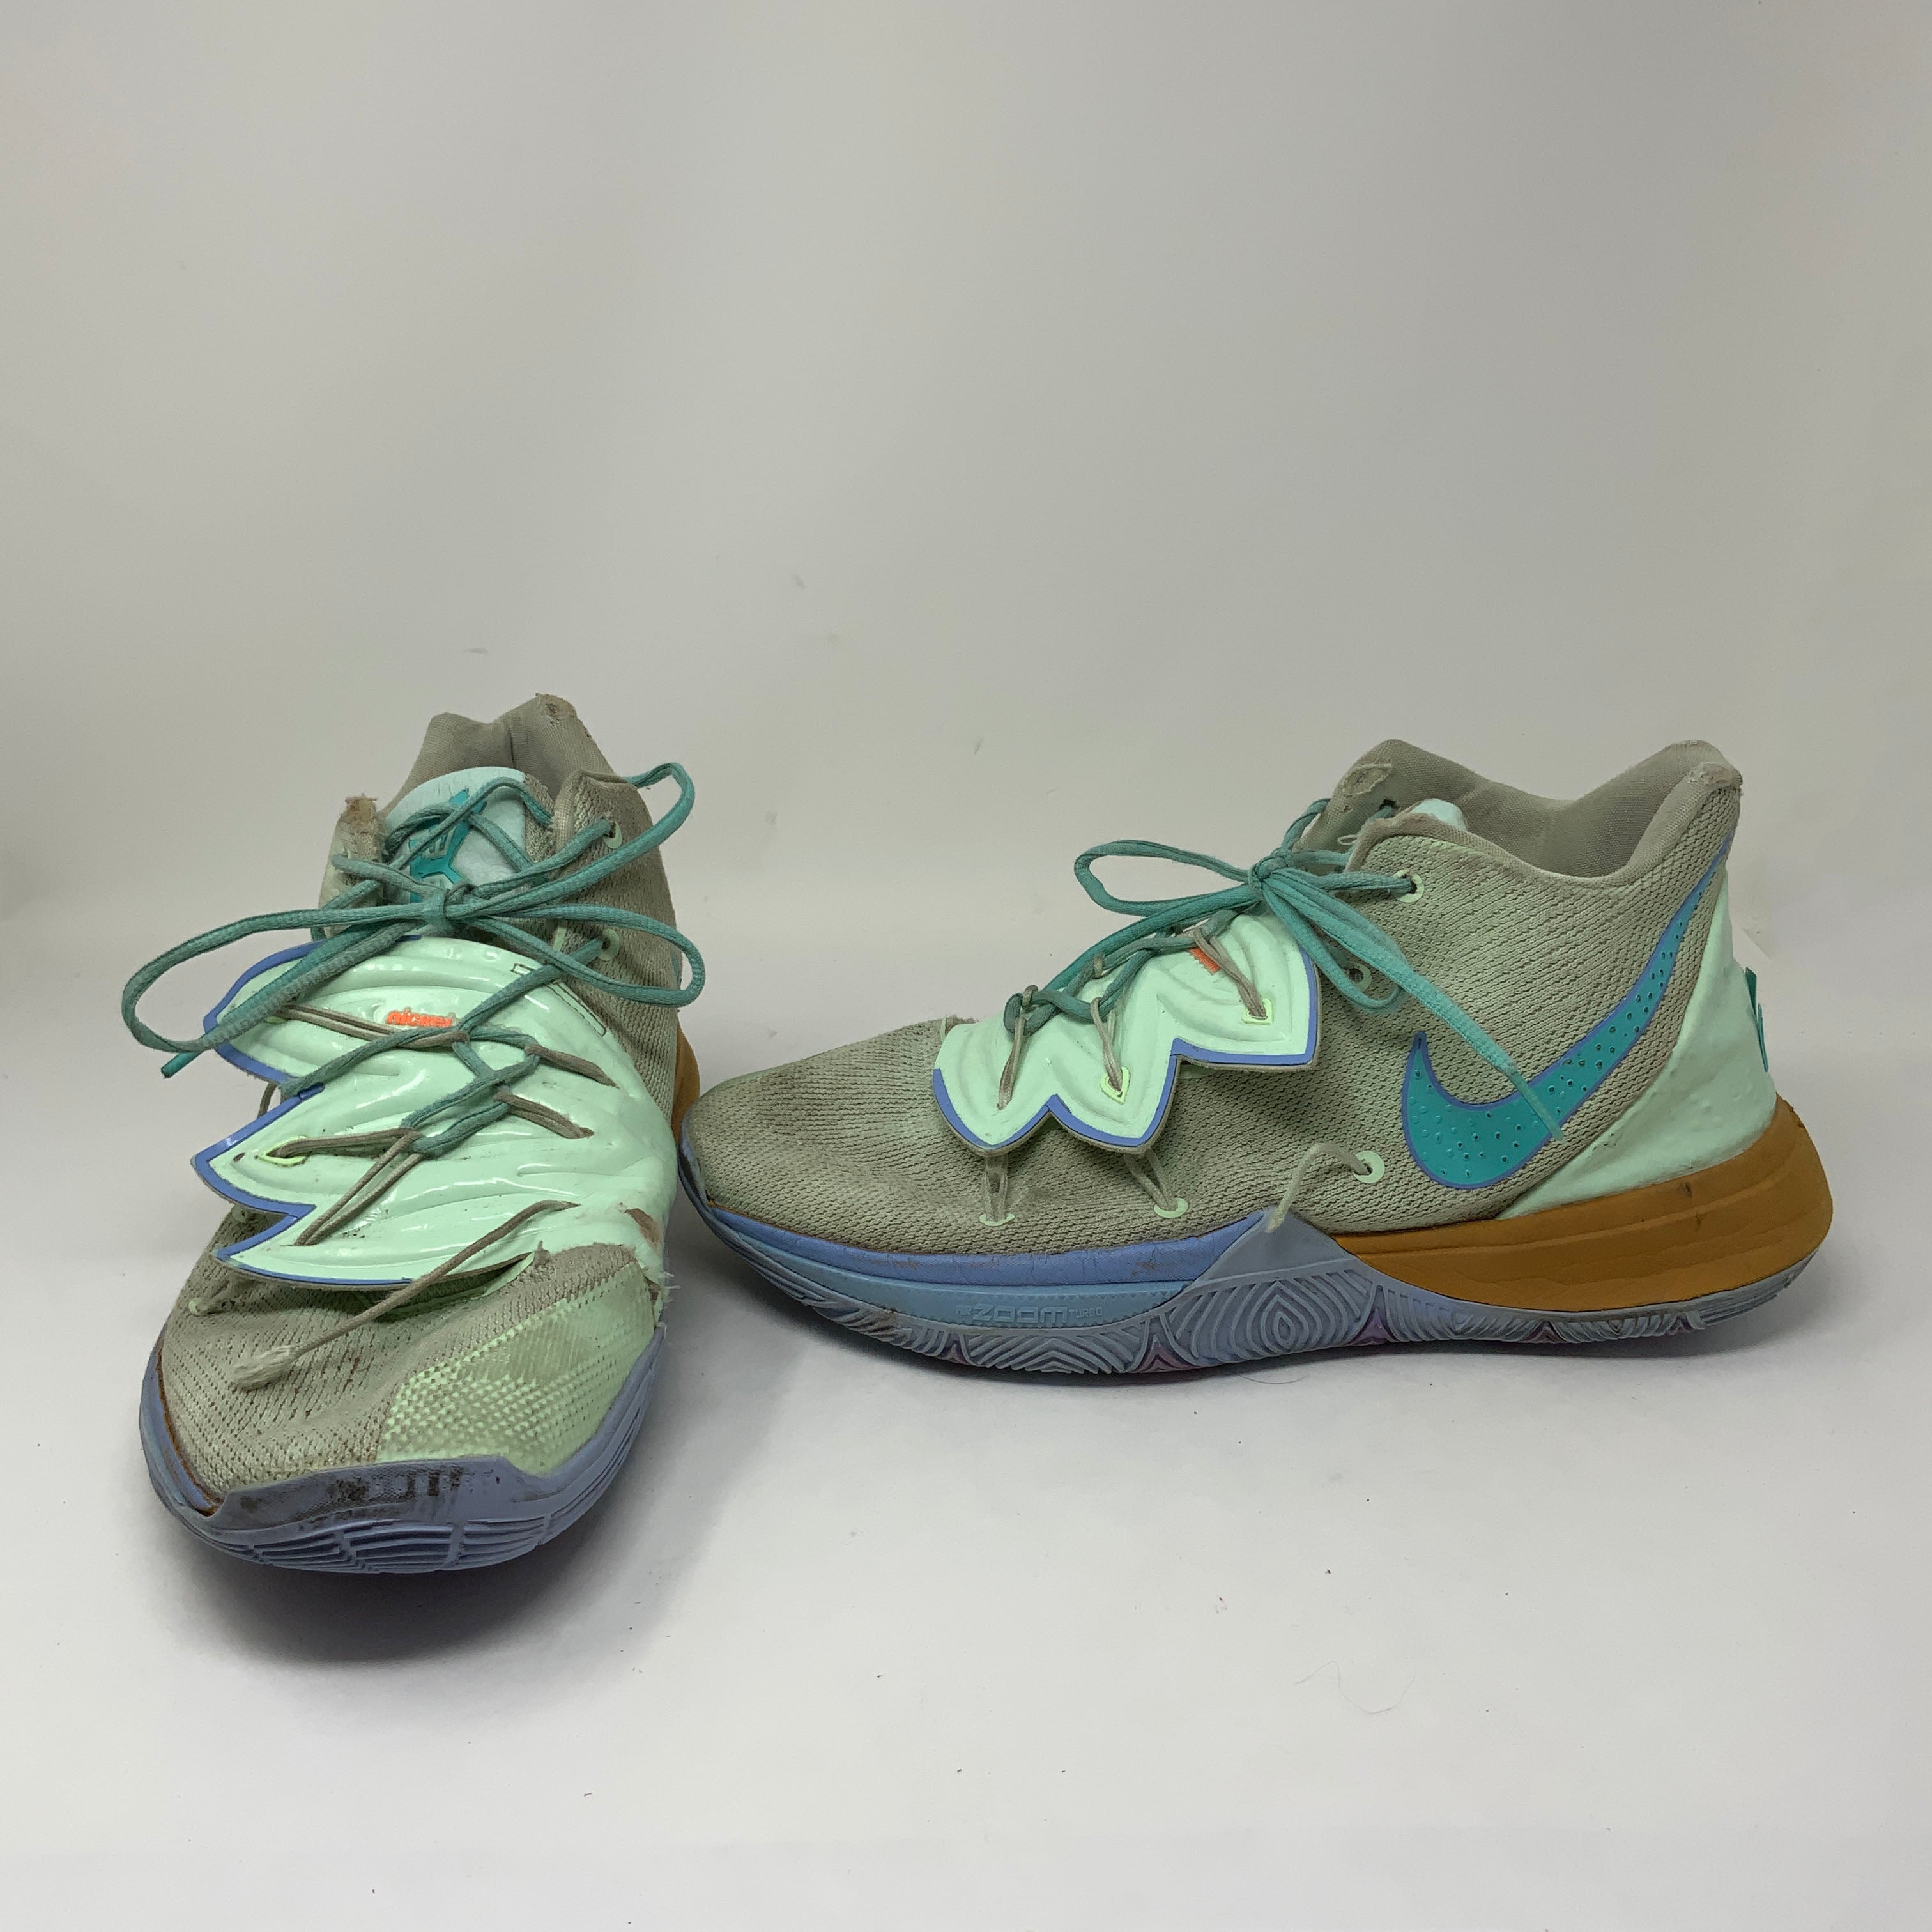 Nike Kyrie 5 Irving Spongebob Squarepants Squidward Collectible Sneake –  Galore Consignment